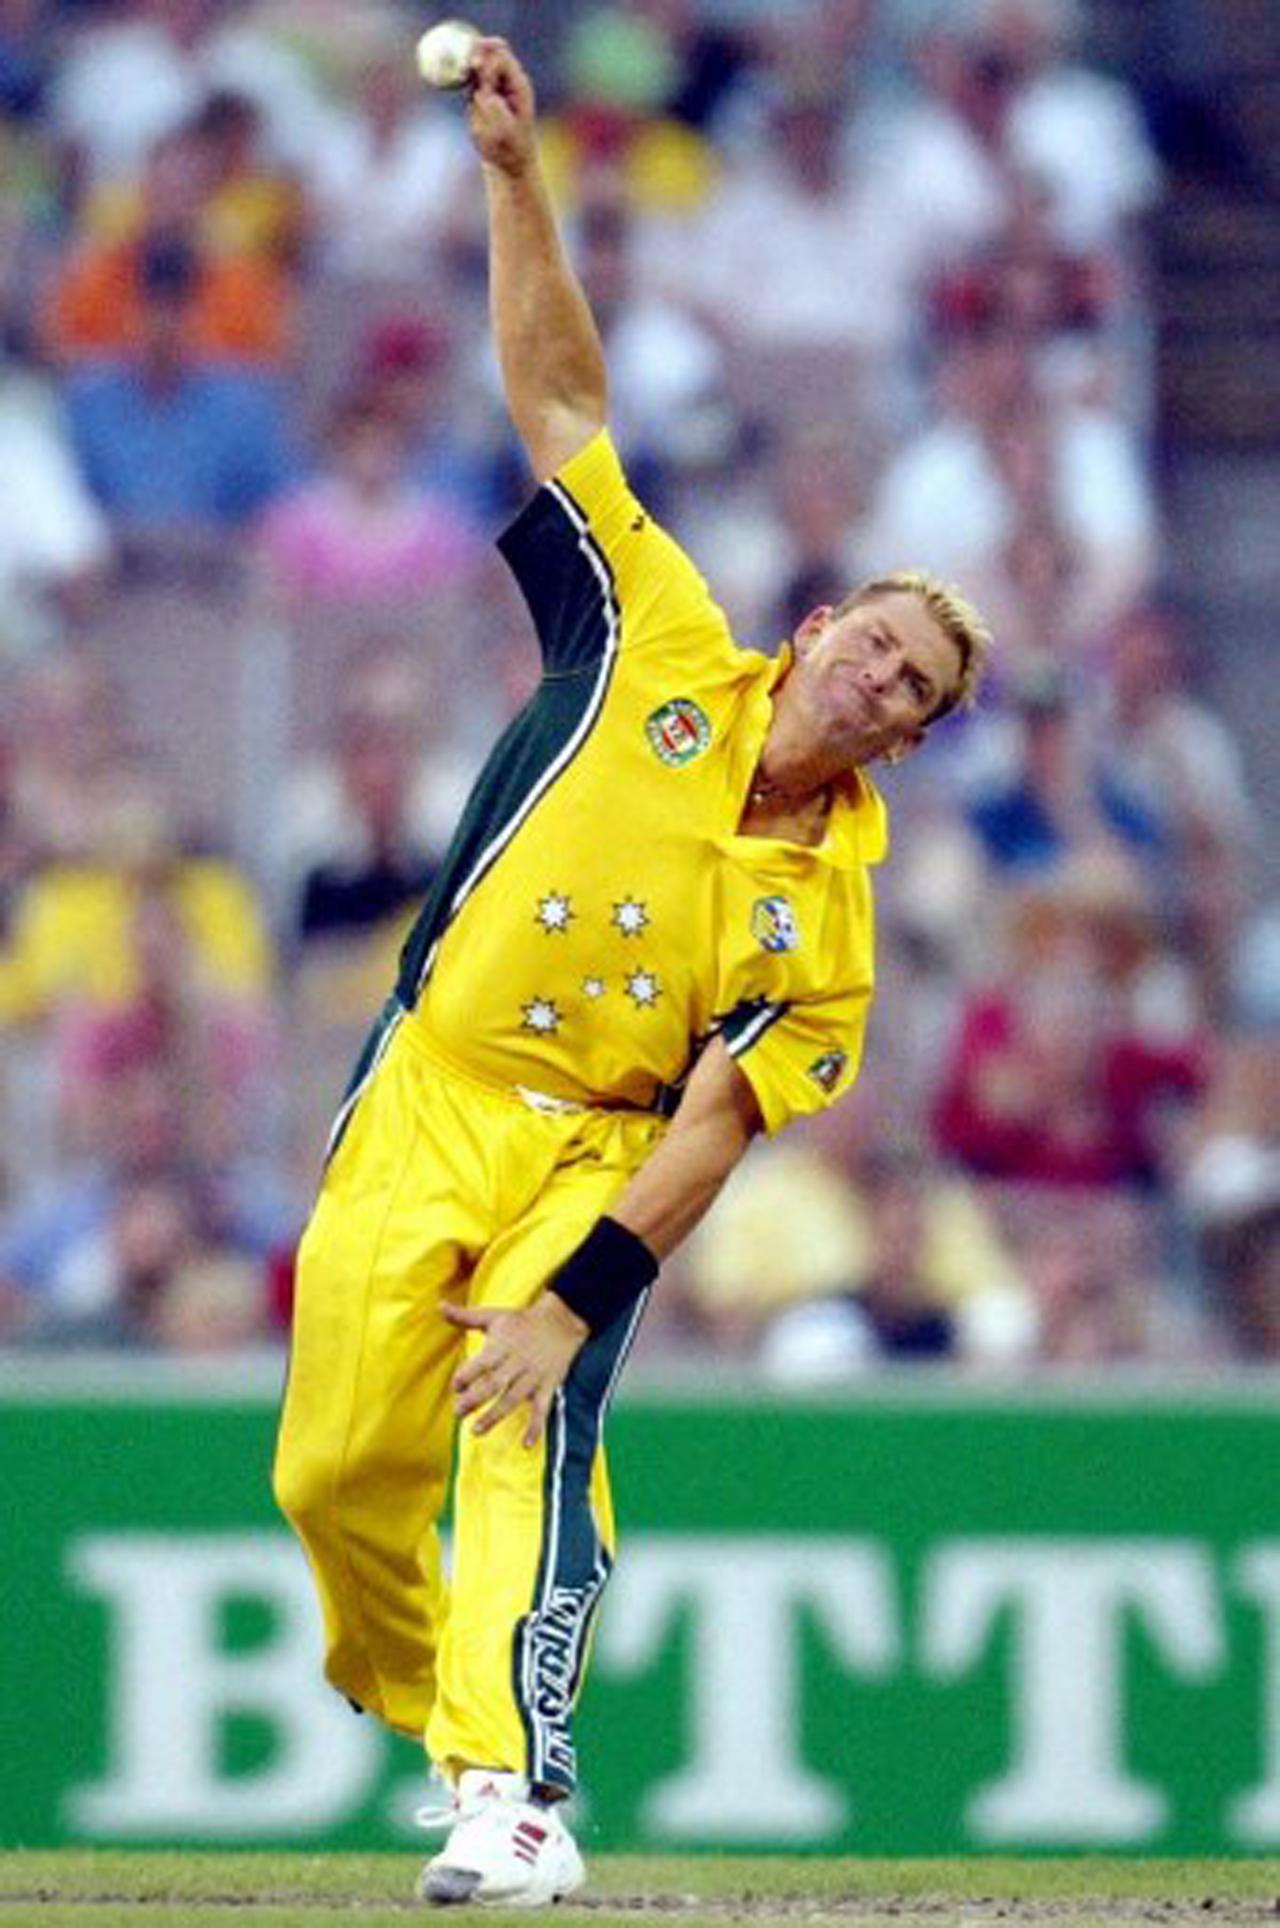 Shane Warne made his ODI debut in March 1993 against New Zealand and played his final ODI in January 2005.